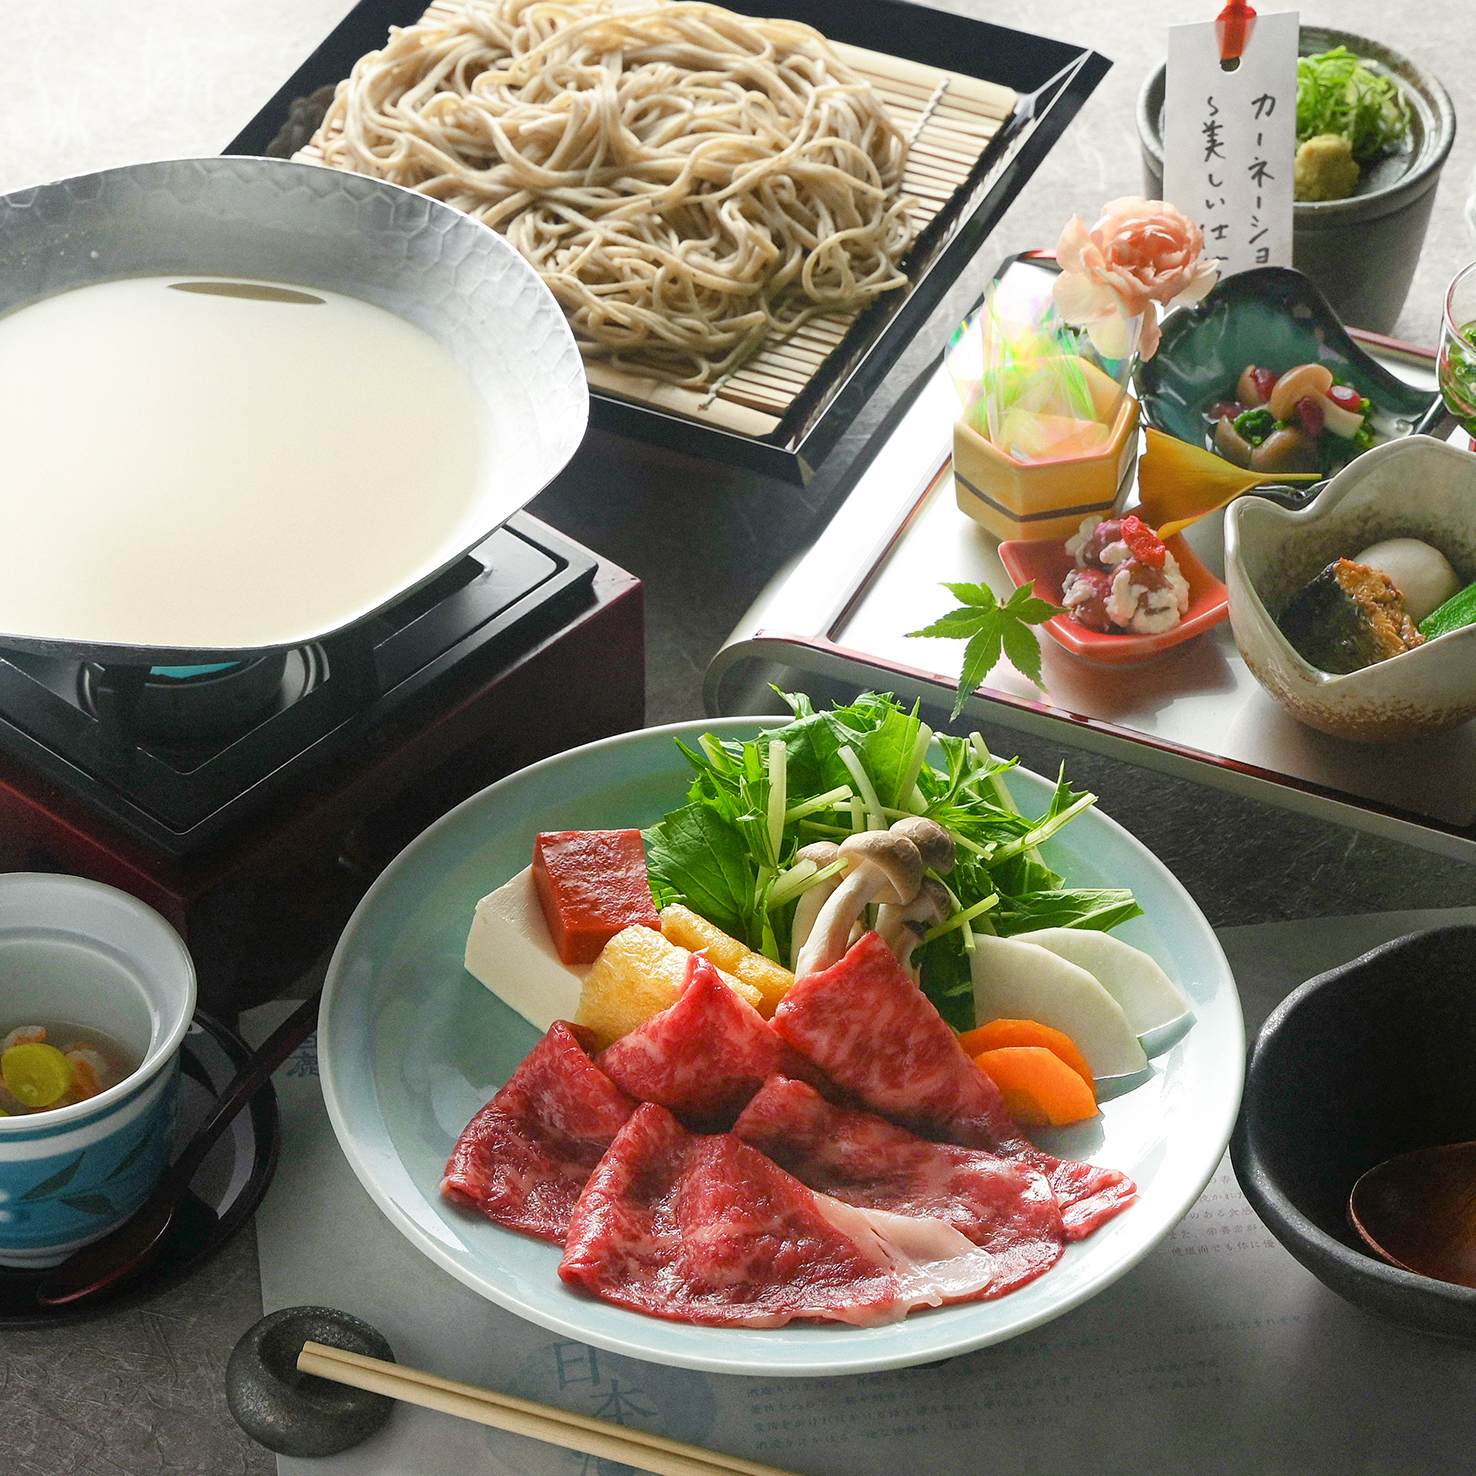 Course menus including sake lees soup, 100% buckwheat soba, and flower basket dishes start from 5,500 yen.